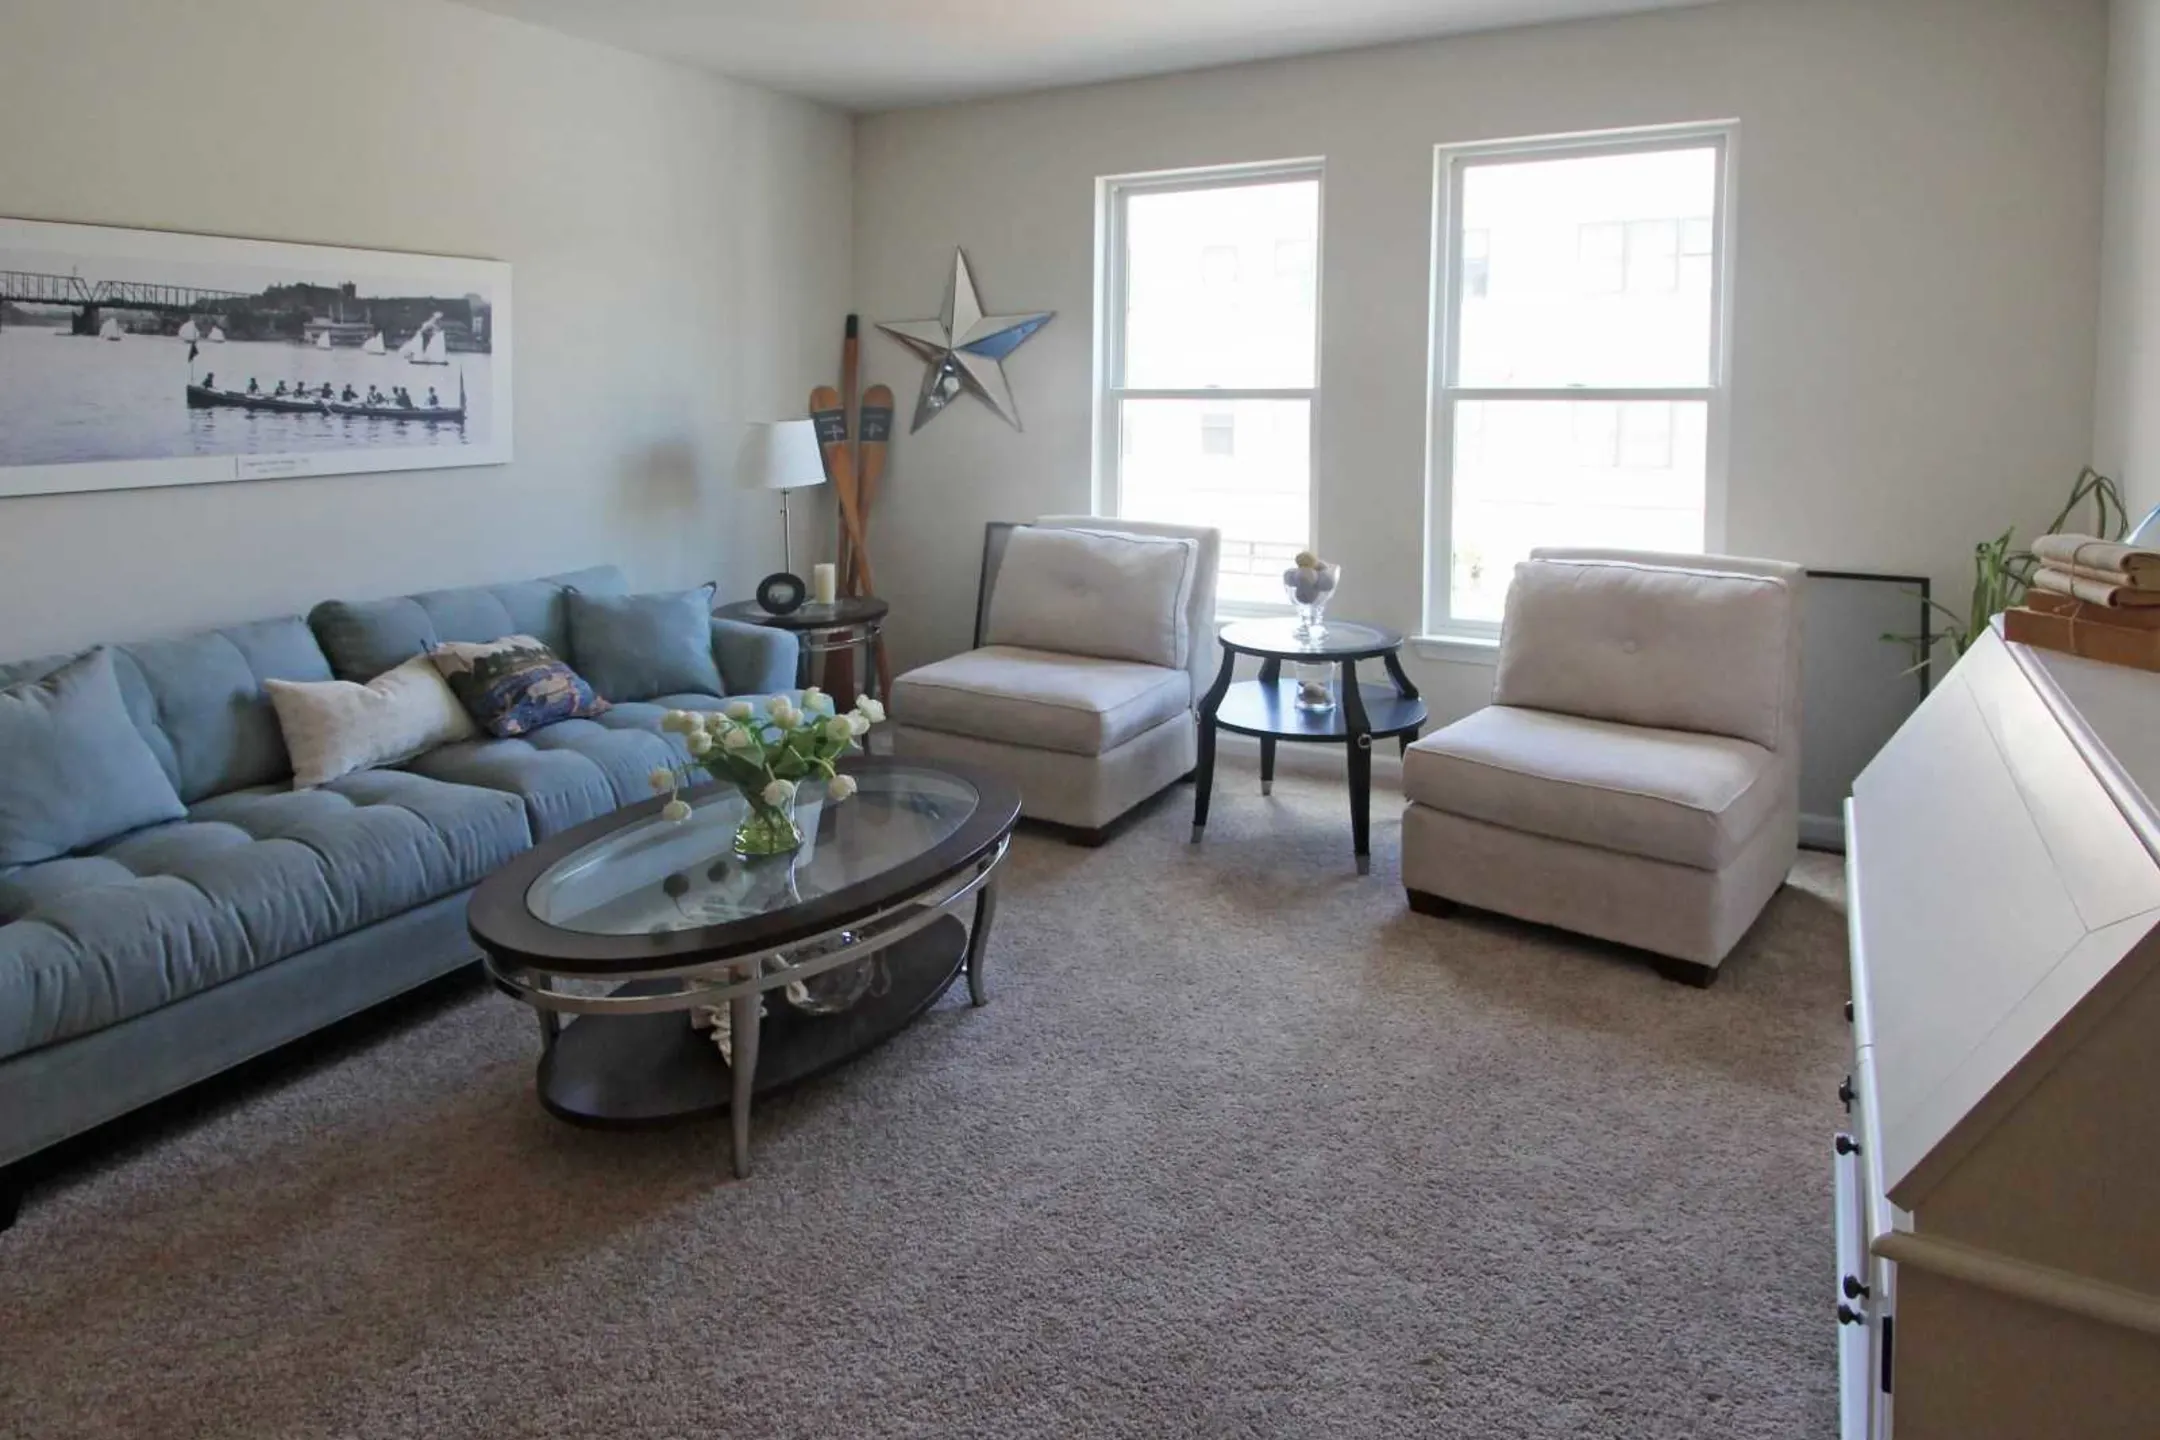 Living Room - 242 Broadway - Schenectady, NY